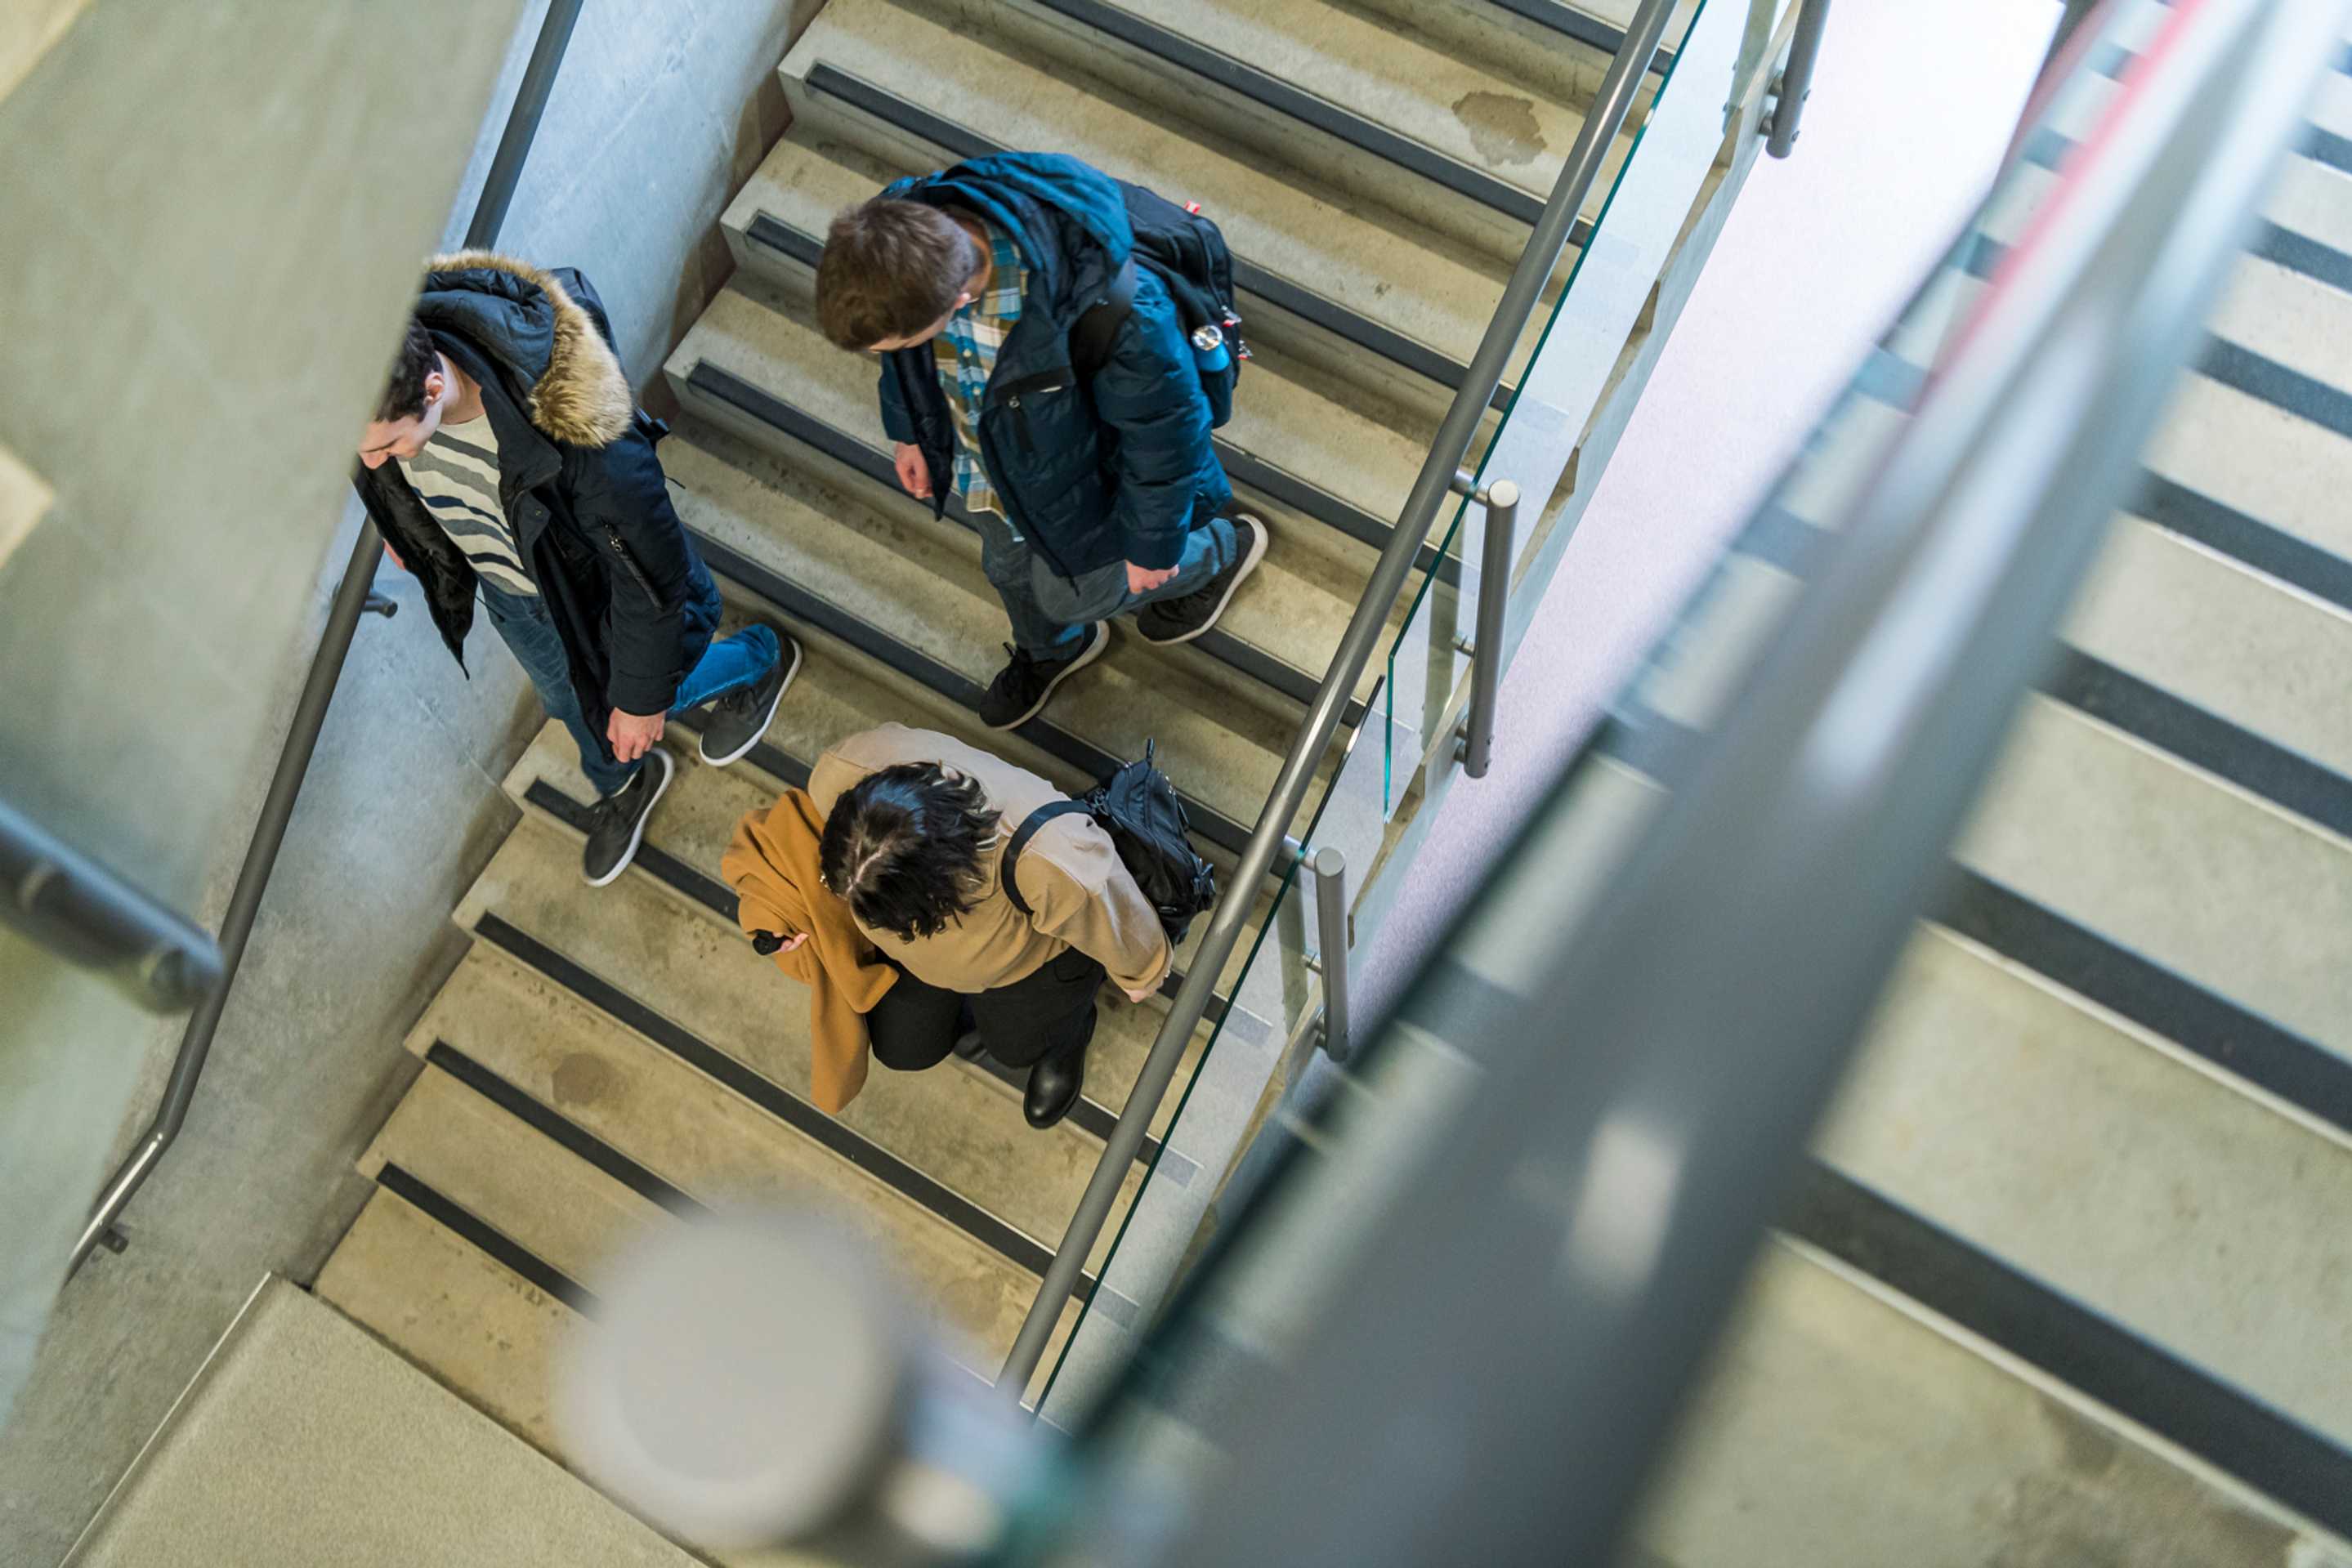 A group of students walking down a stairwell